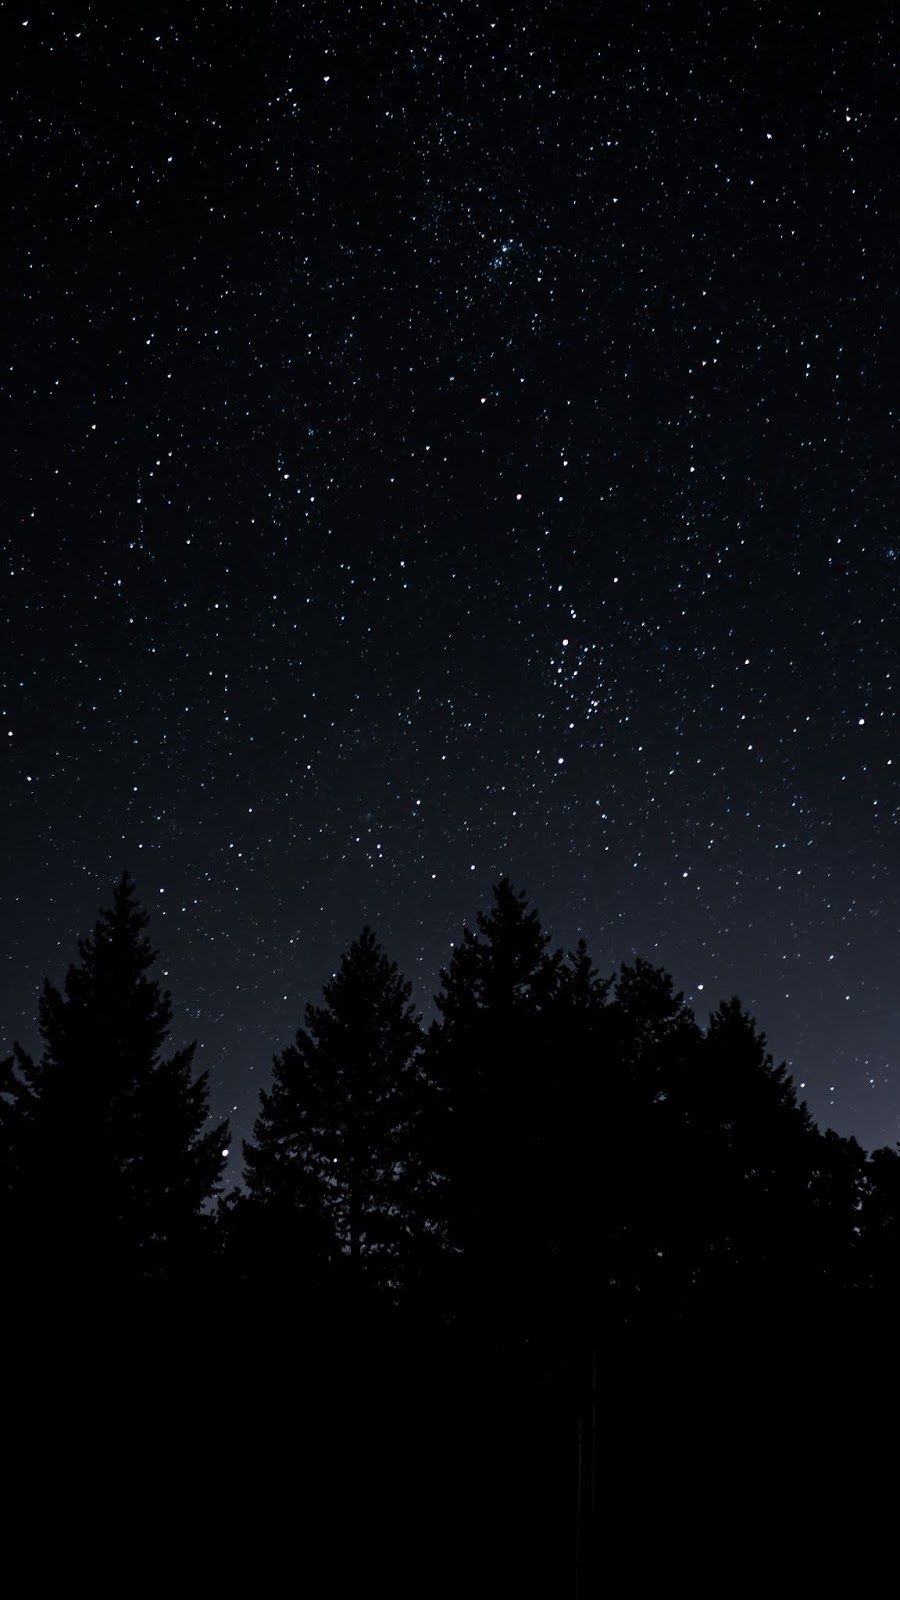 A night sky with stars and trees - Night